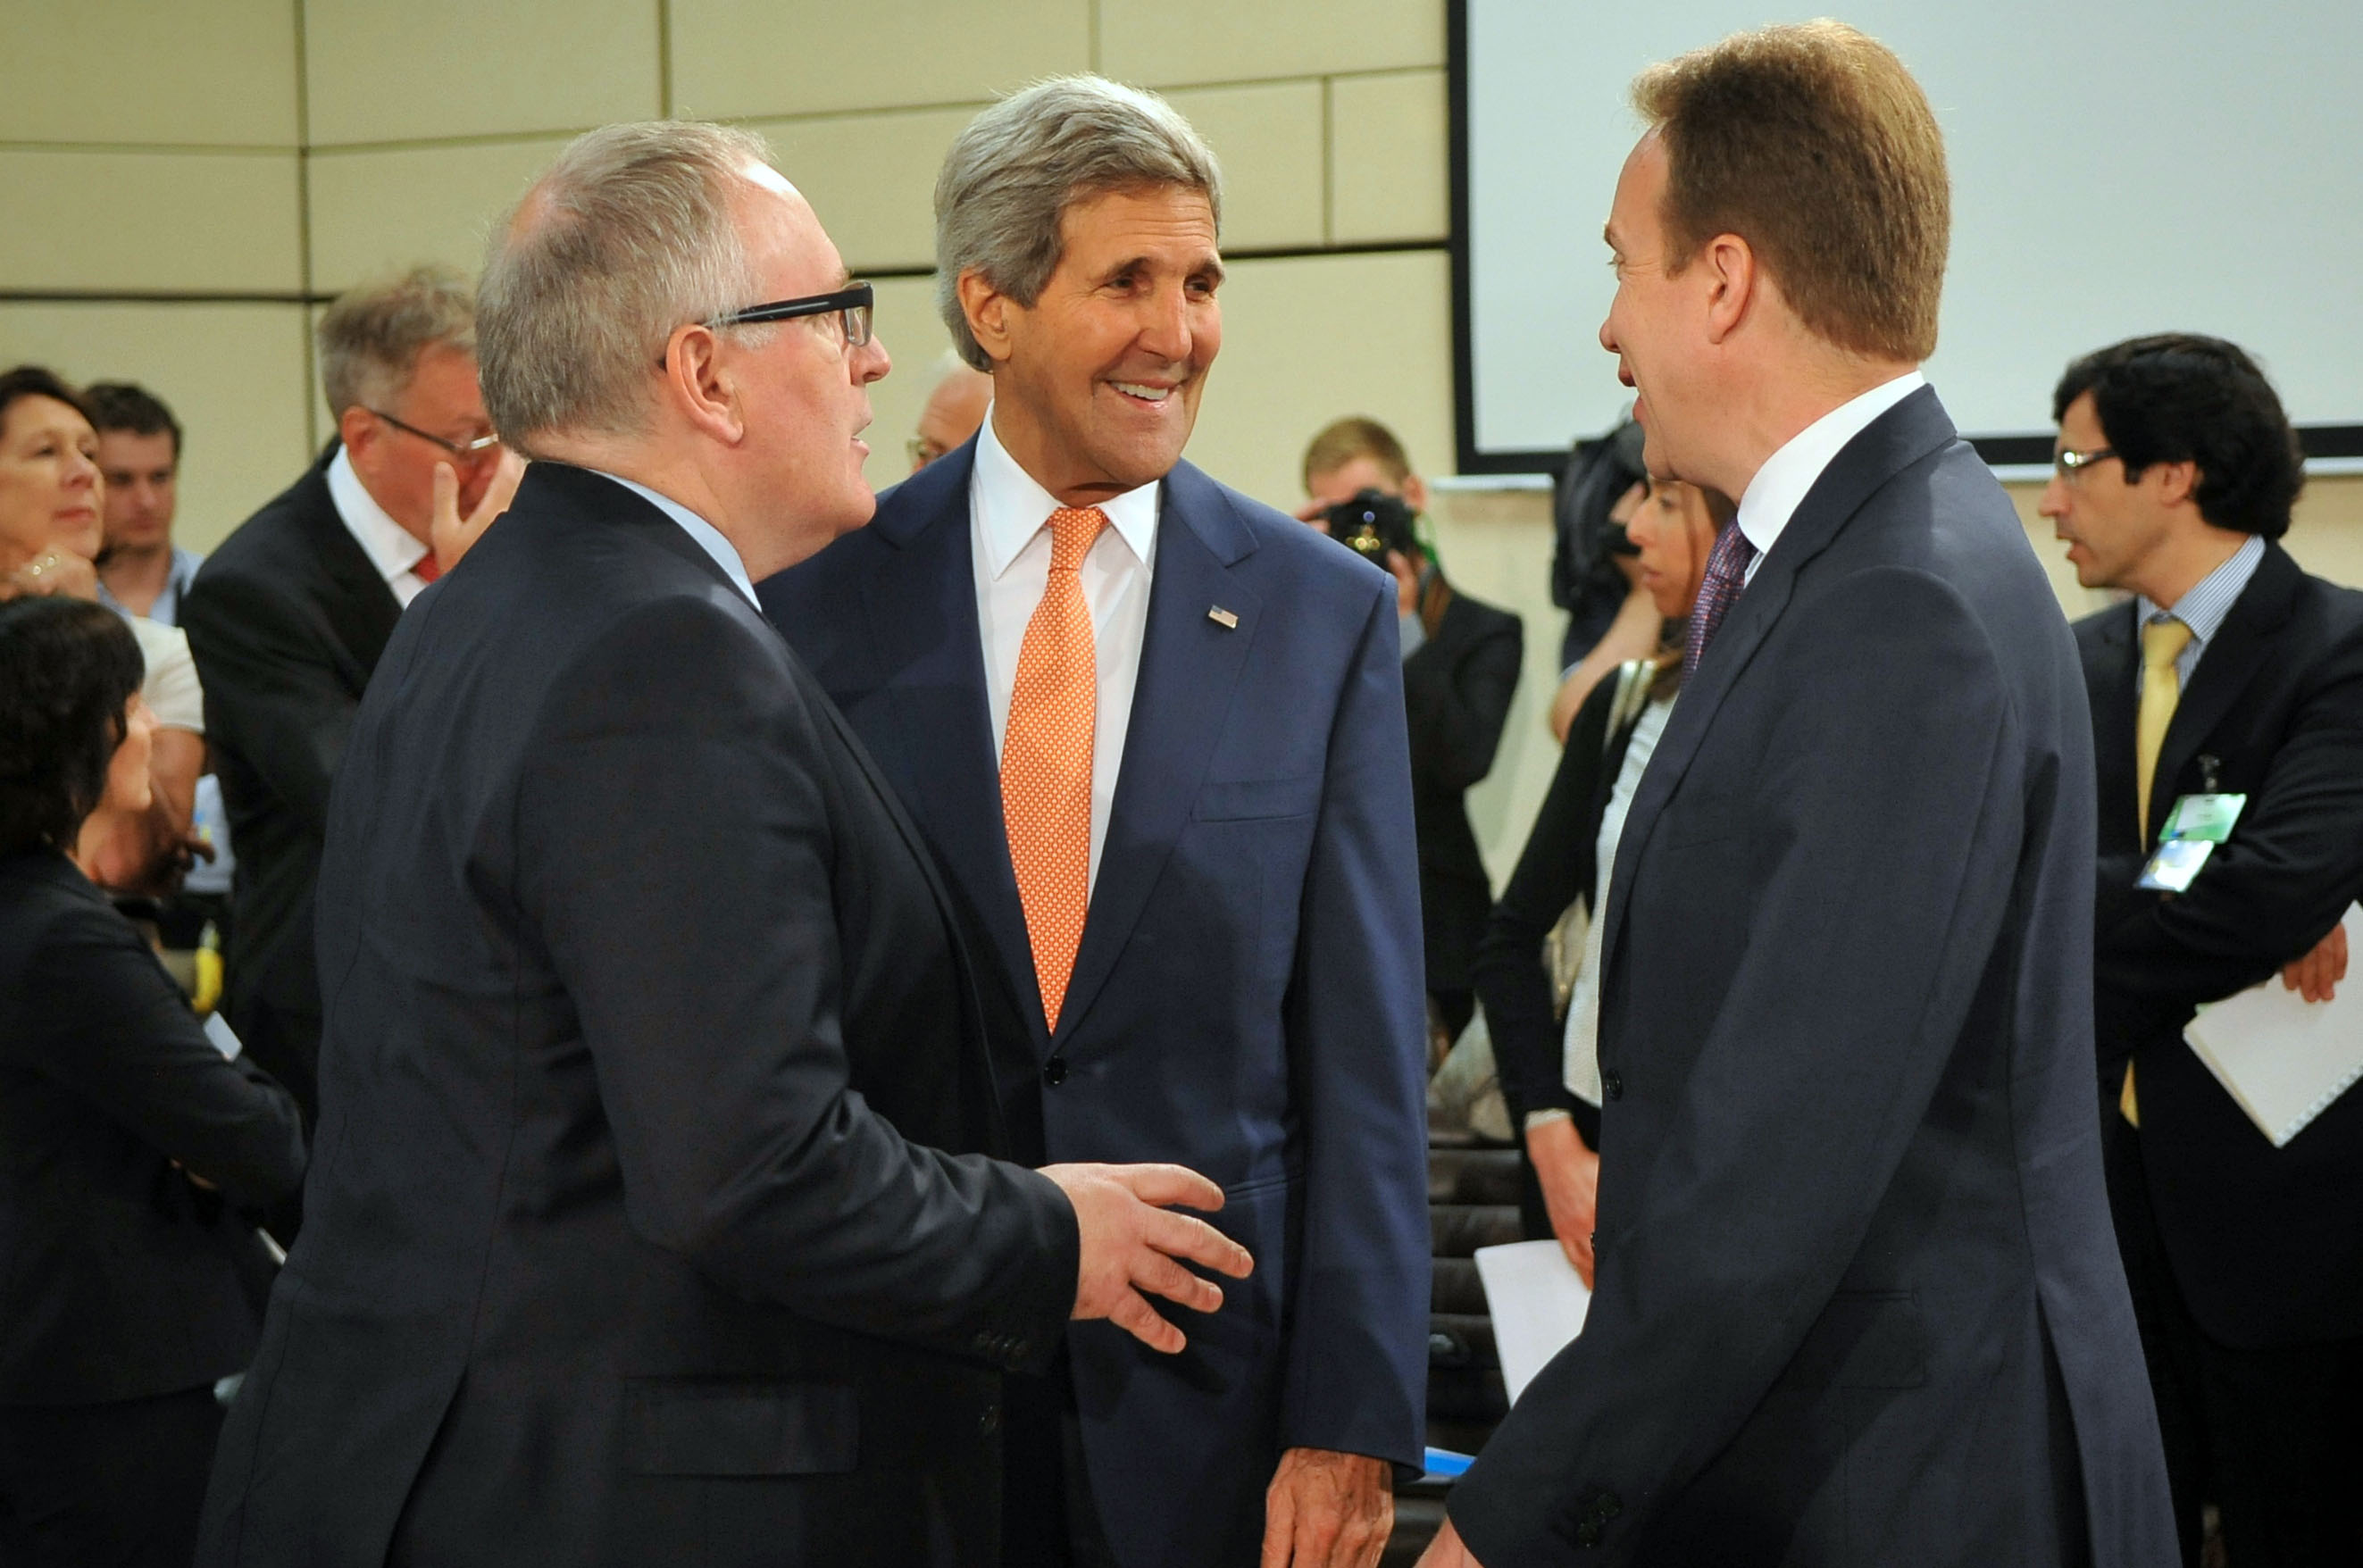 Secretary Kerry Chats With Dutch Foreign Minister Timmermans and Norwegian Foreign Minister Brende Before NATO Meeting in Brussels (14525322603)